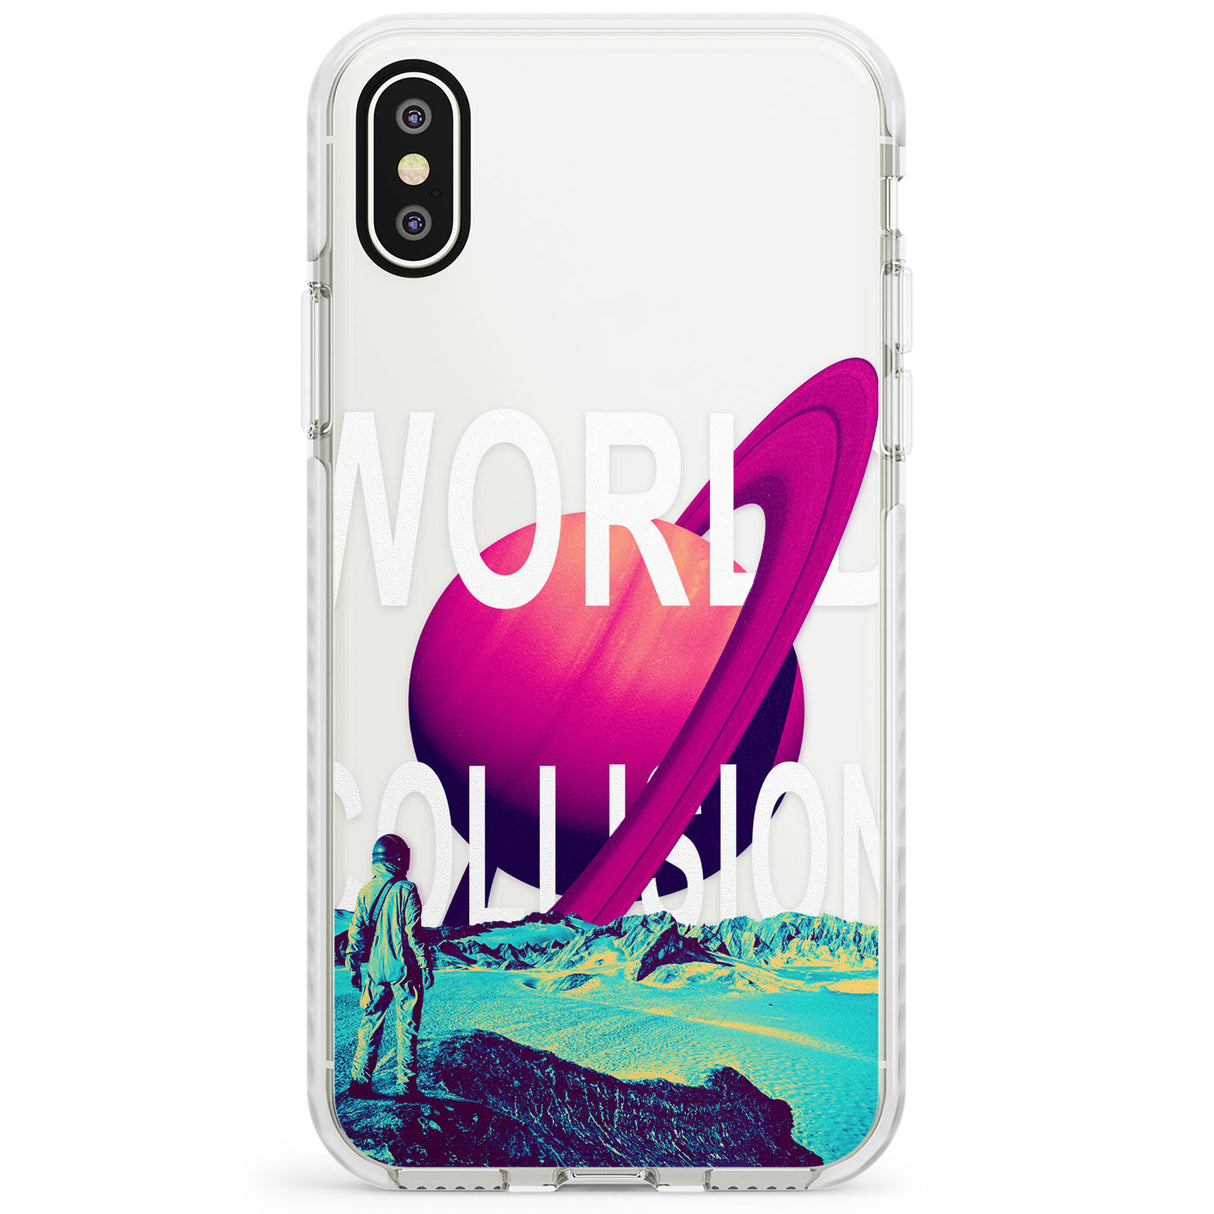 World Collision Impact Phone Case for iPhone X XS Max XR